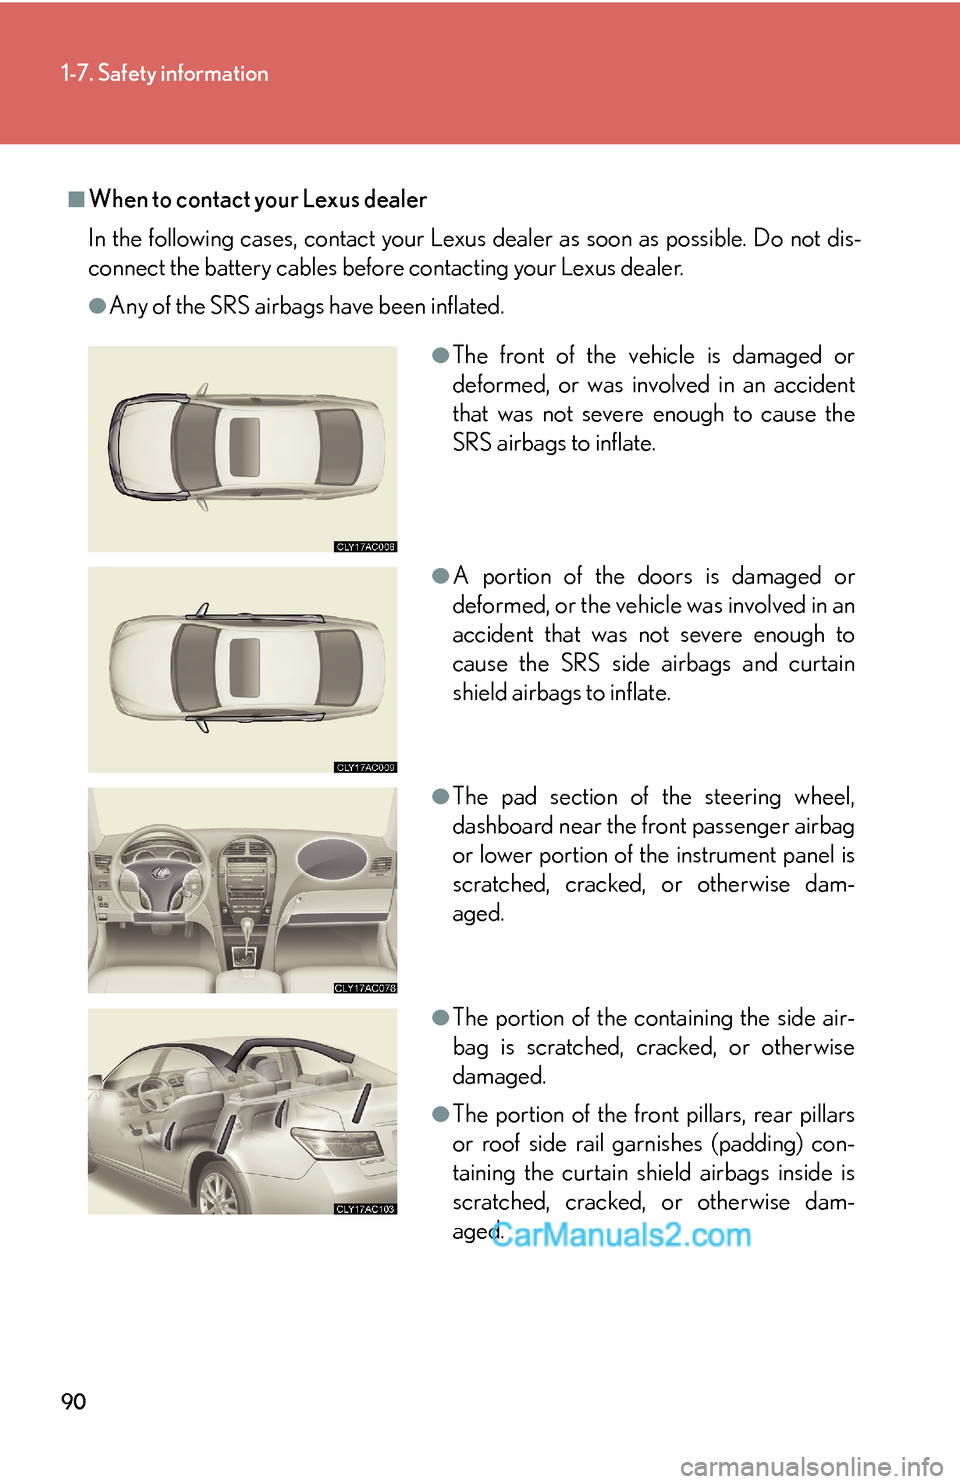 Lexus ES350 2010  Safety Information 90
1-7. Safety information
■When to contact your Lexus dealer
In the following cases, contact your Lexus dealer as soon as possible. Do not dis-
connect the battery cables before contacting your Lex